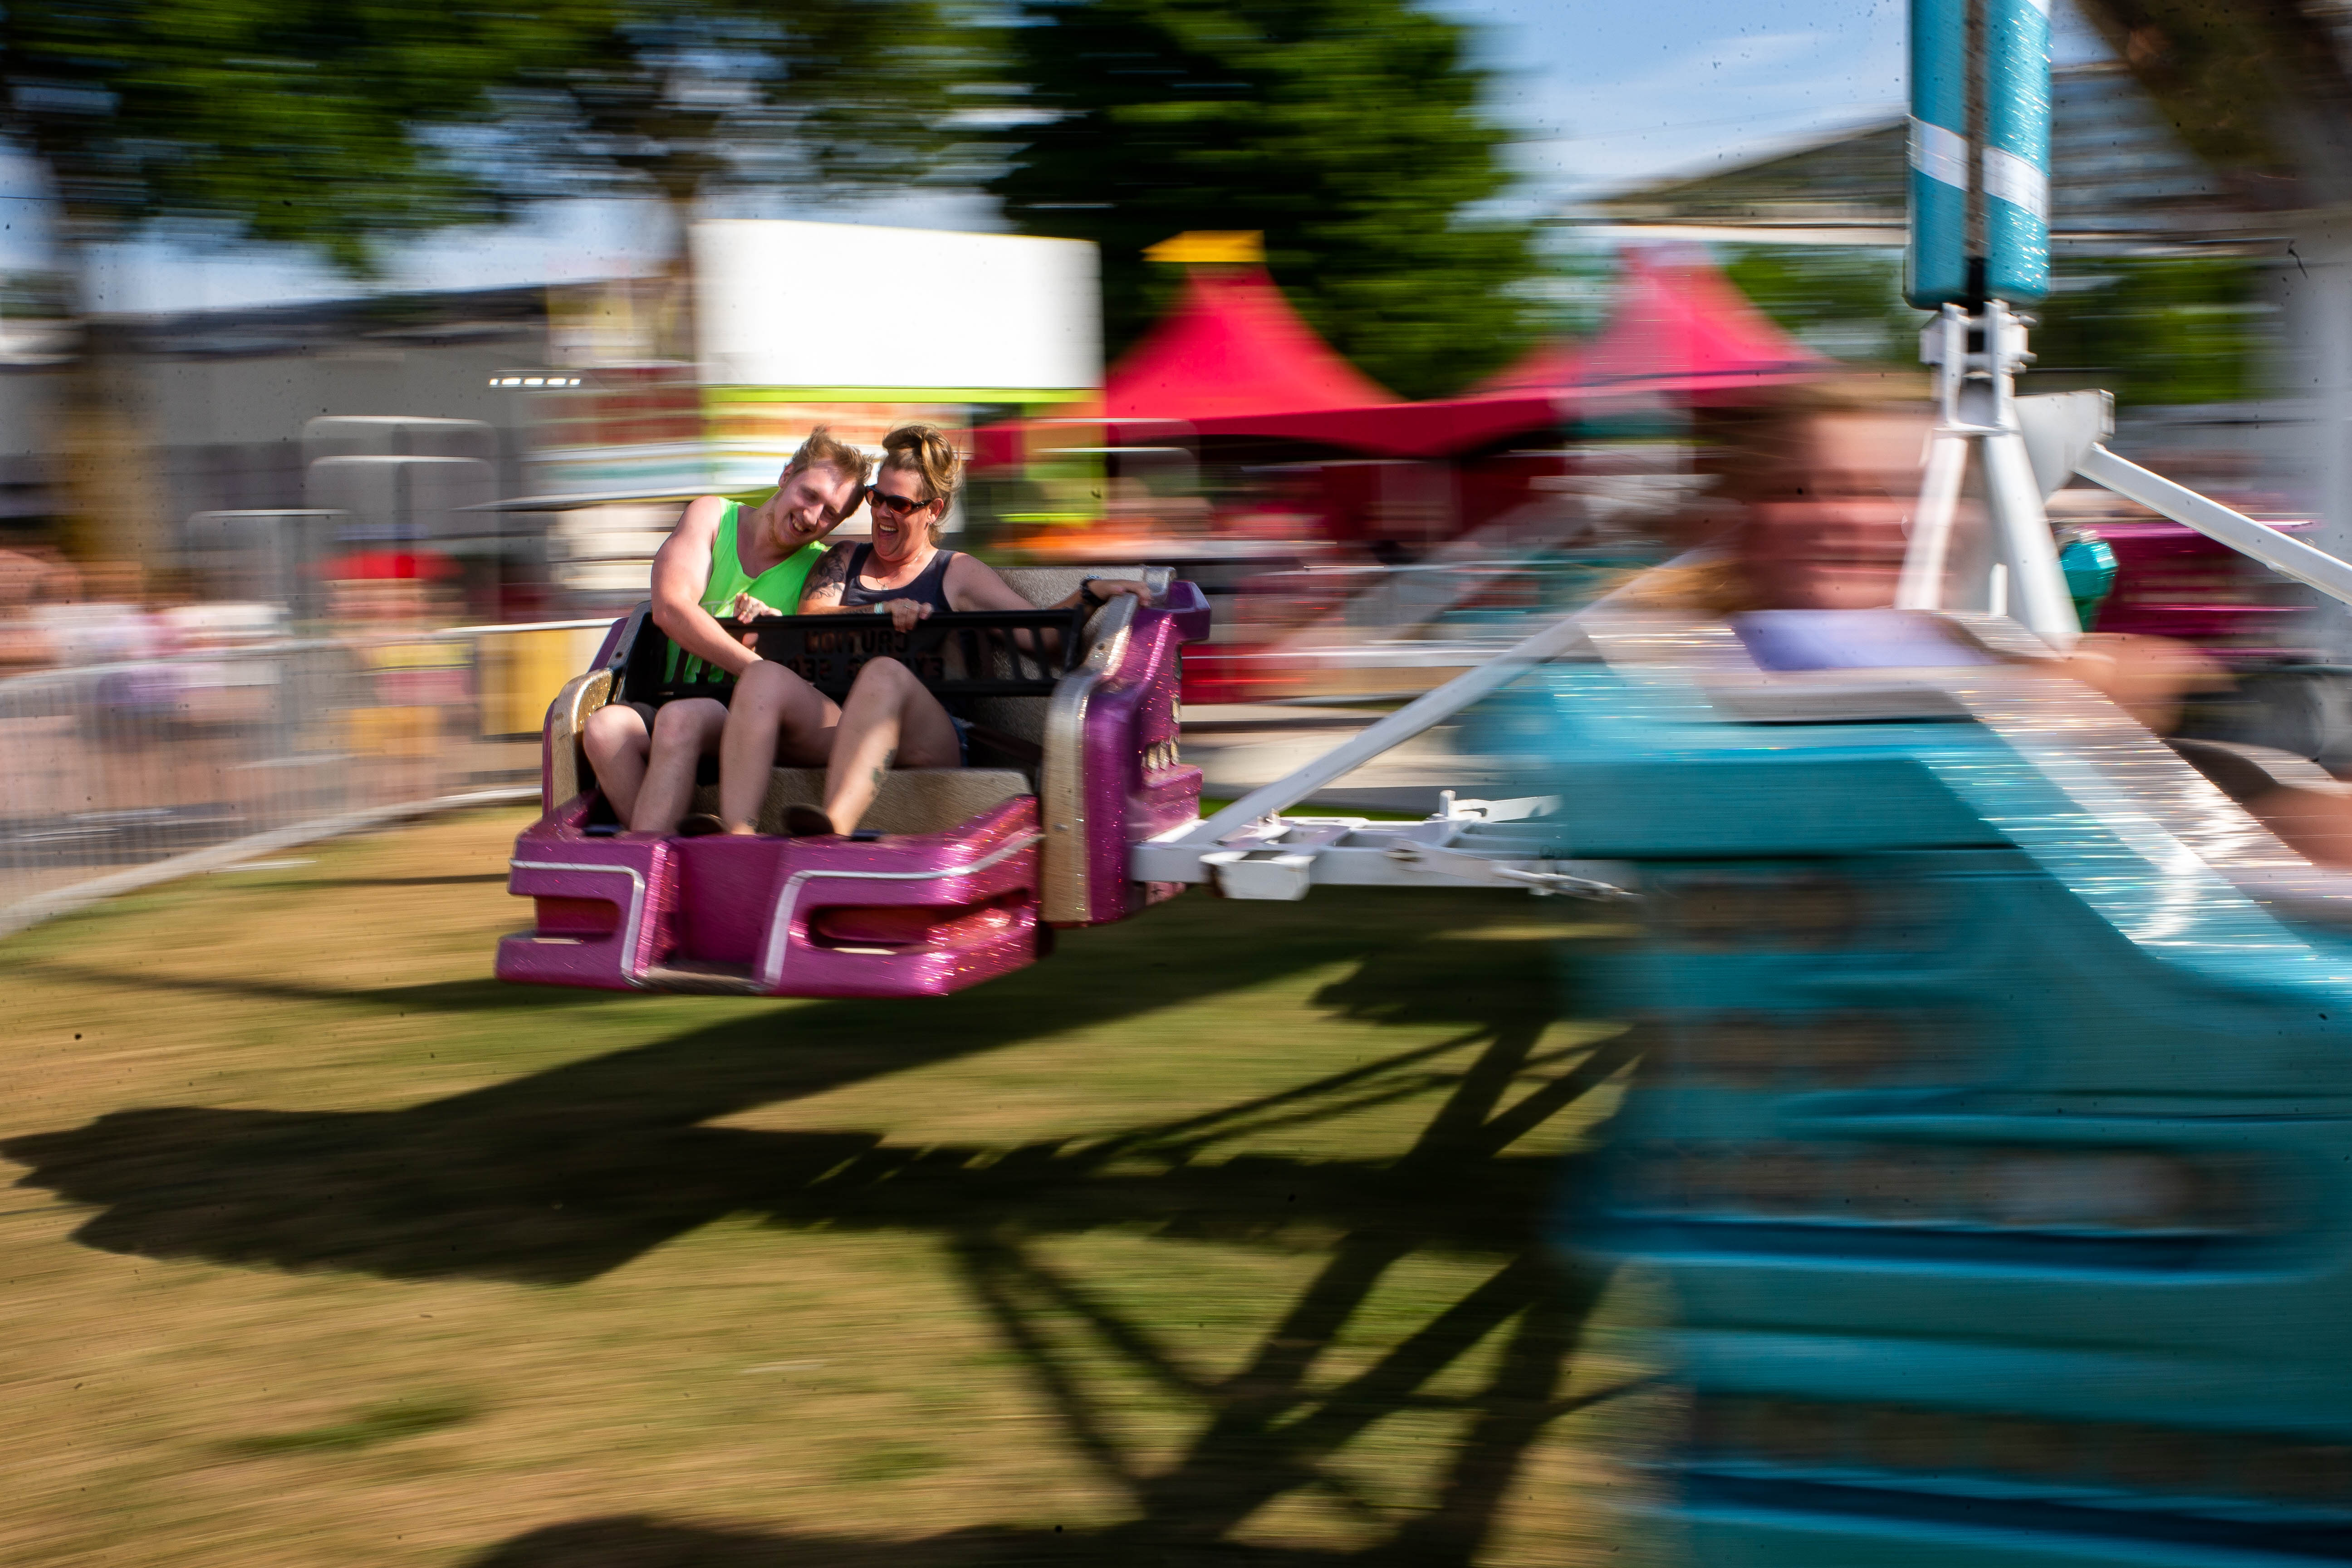 Scenes from the Ionia Free Fair as thousands gather to enjoy rides, animals, food and more Tuesday, July 19, 2022.